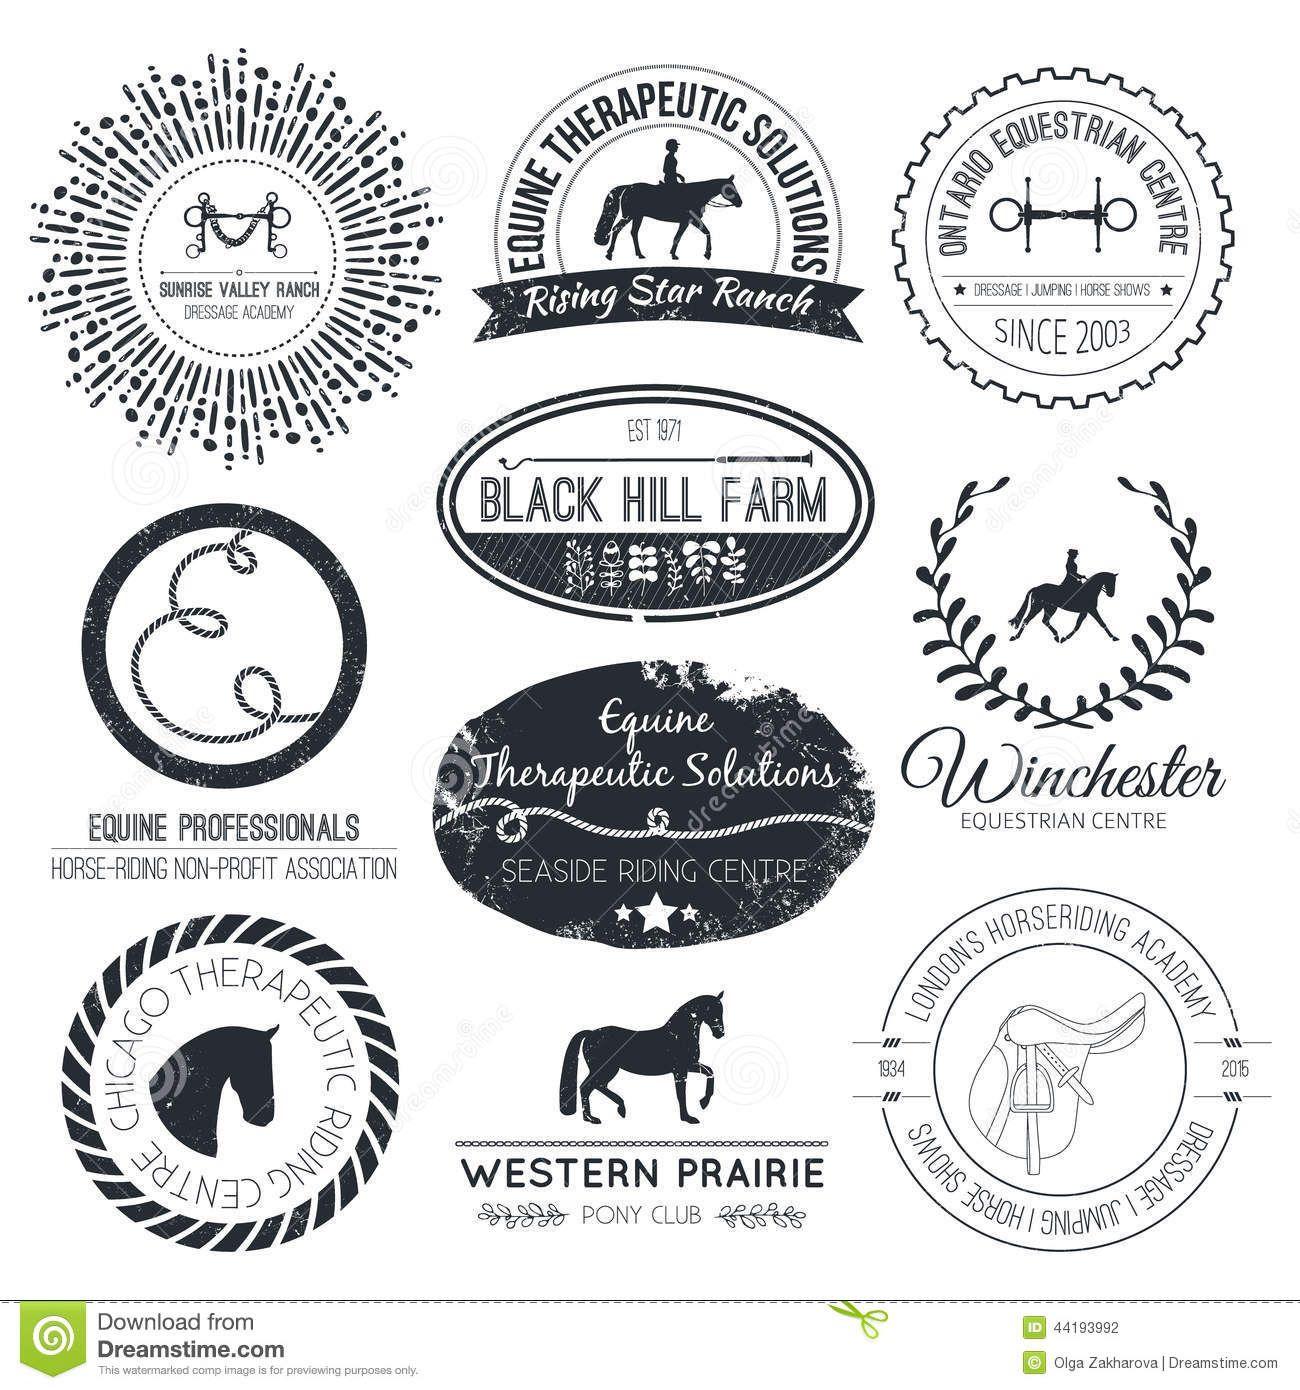 Horse Jumping through Circle Logo - vintage farm logos - Google Search | Project // Timber Trails Forest ...